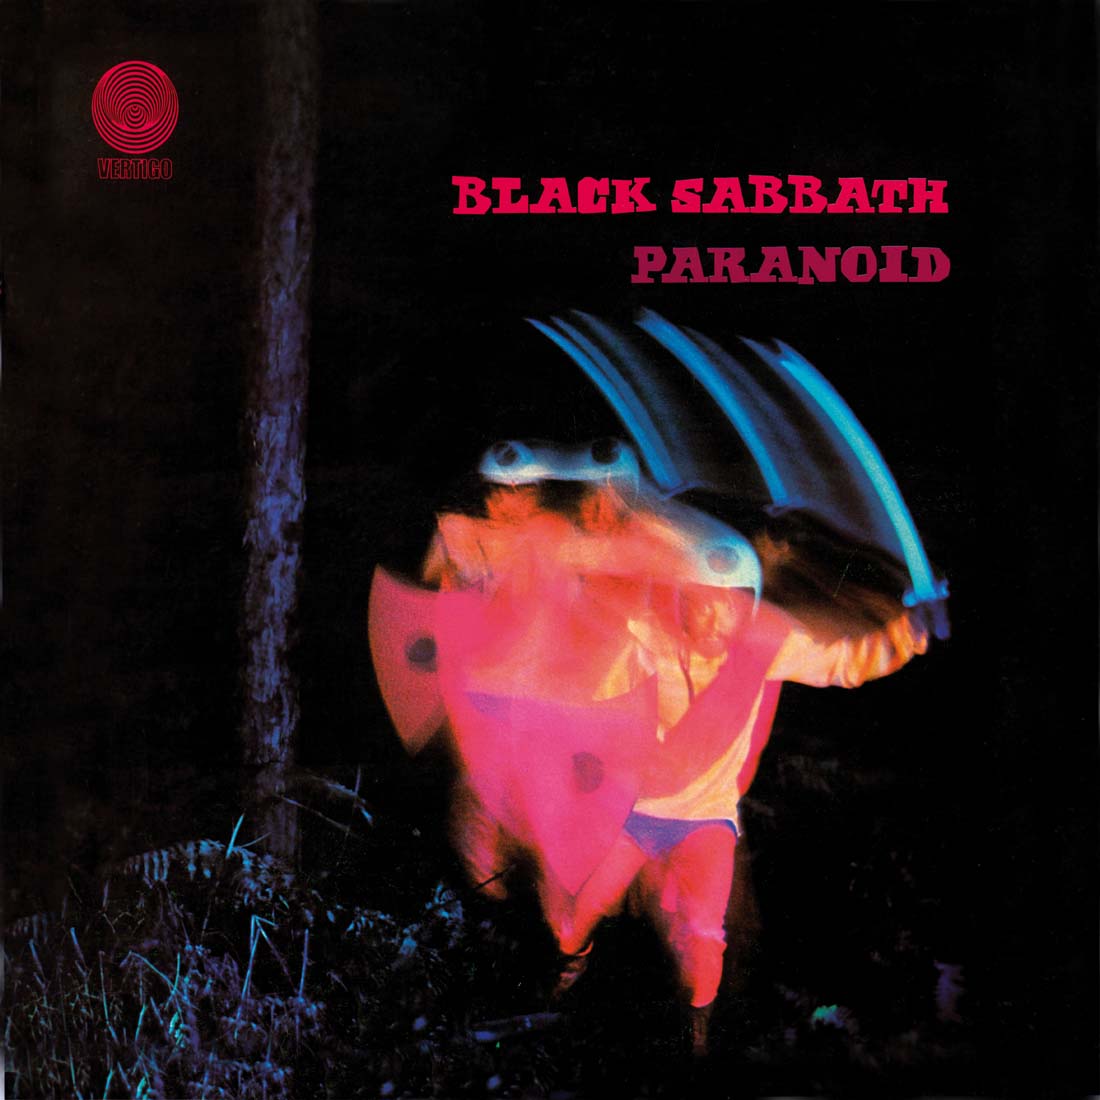 I look back and am amazed how we released ‘Black Sabbath’ in February 1970 then toured, wrote, recorded and released ‘Paranoid’ only 7 months later! And these weren’t knock-off albums, they are both full of our classic tracks.

-- Tony